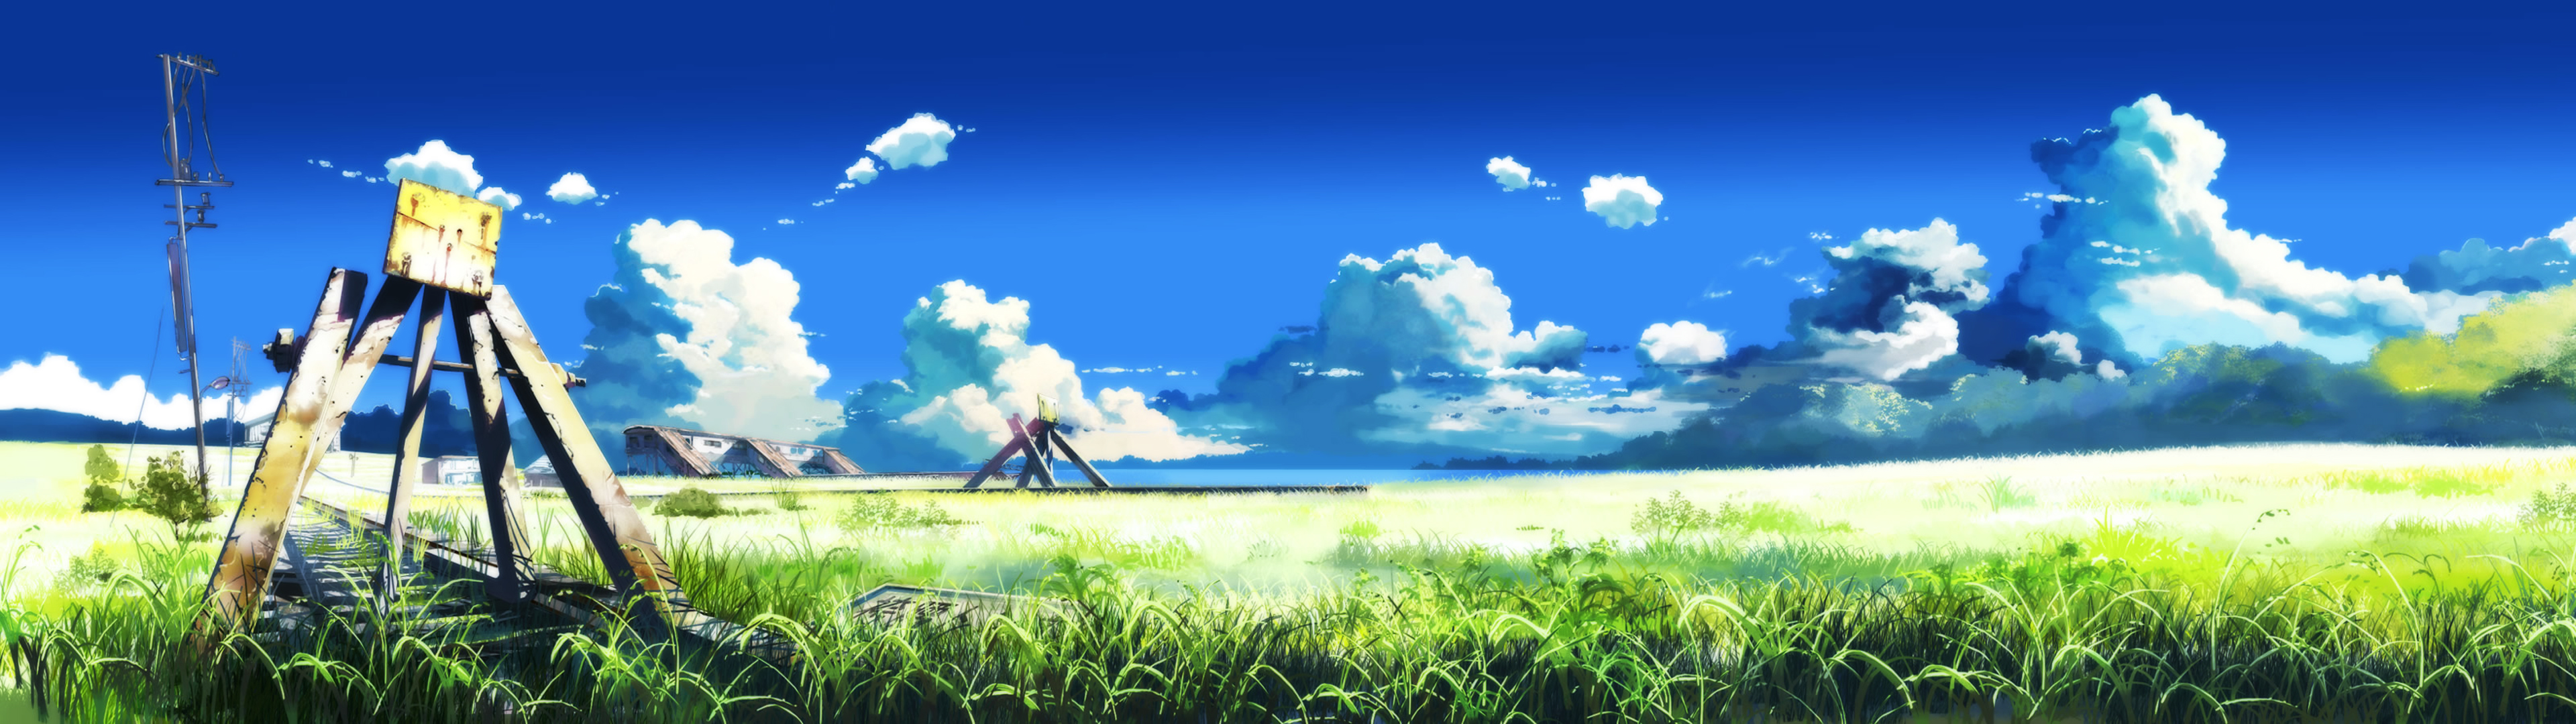 Anime Dual Monitor Wallpaper 46 images